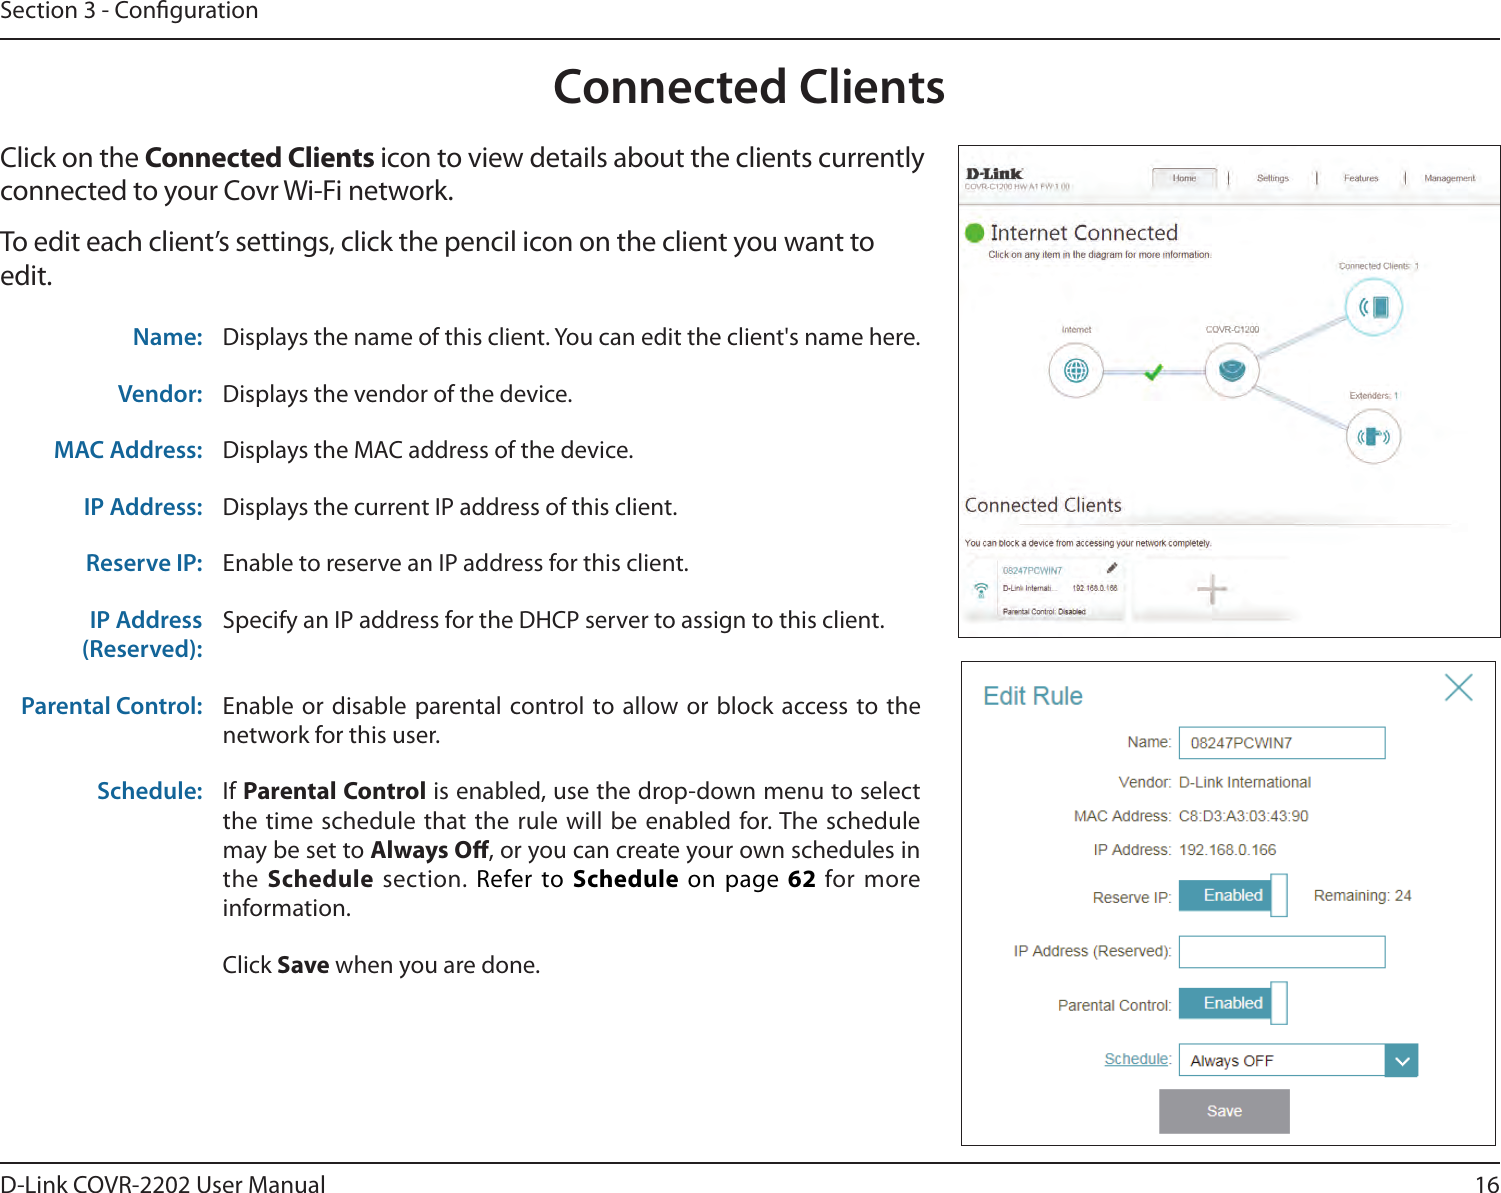 16D-Link COVR-2202 User ManualSection 3 - CongurationConnected ClientsClick on the Connected Clients icon to view details about the clients currently connected to your Covr Wi-Fi network.To edit each client’s settings, click the pencil icon on the client you want to edit.Name: Displays the name of this client. You can edit the client&apos;s name here.Vendor: Displays the vendor of the device.MAC Address: Displays the MAC address of the device.IP Address: Displays the current IP address of this client.Reserve IP: Enable to reserve an IP address for this client.IP Address (Reserved):Specify an IP address for the DHCP server to assign to this client.Parental Control: Enable or disable parental control to allow or block access to the network for this user.Schedule: If Parental Control is enabled, use the drop-down menu to select the time schedule that the rule will be enabled for. The schedule may be set to Always O, or you can create your own schedules in the Schedule section. Refer to Schedule on page 62 for more information.Click Save when you are done.